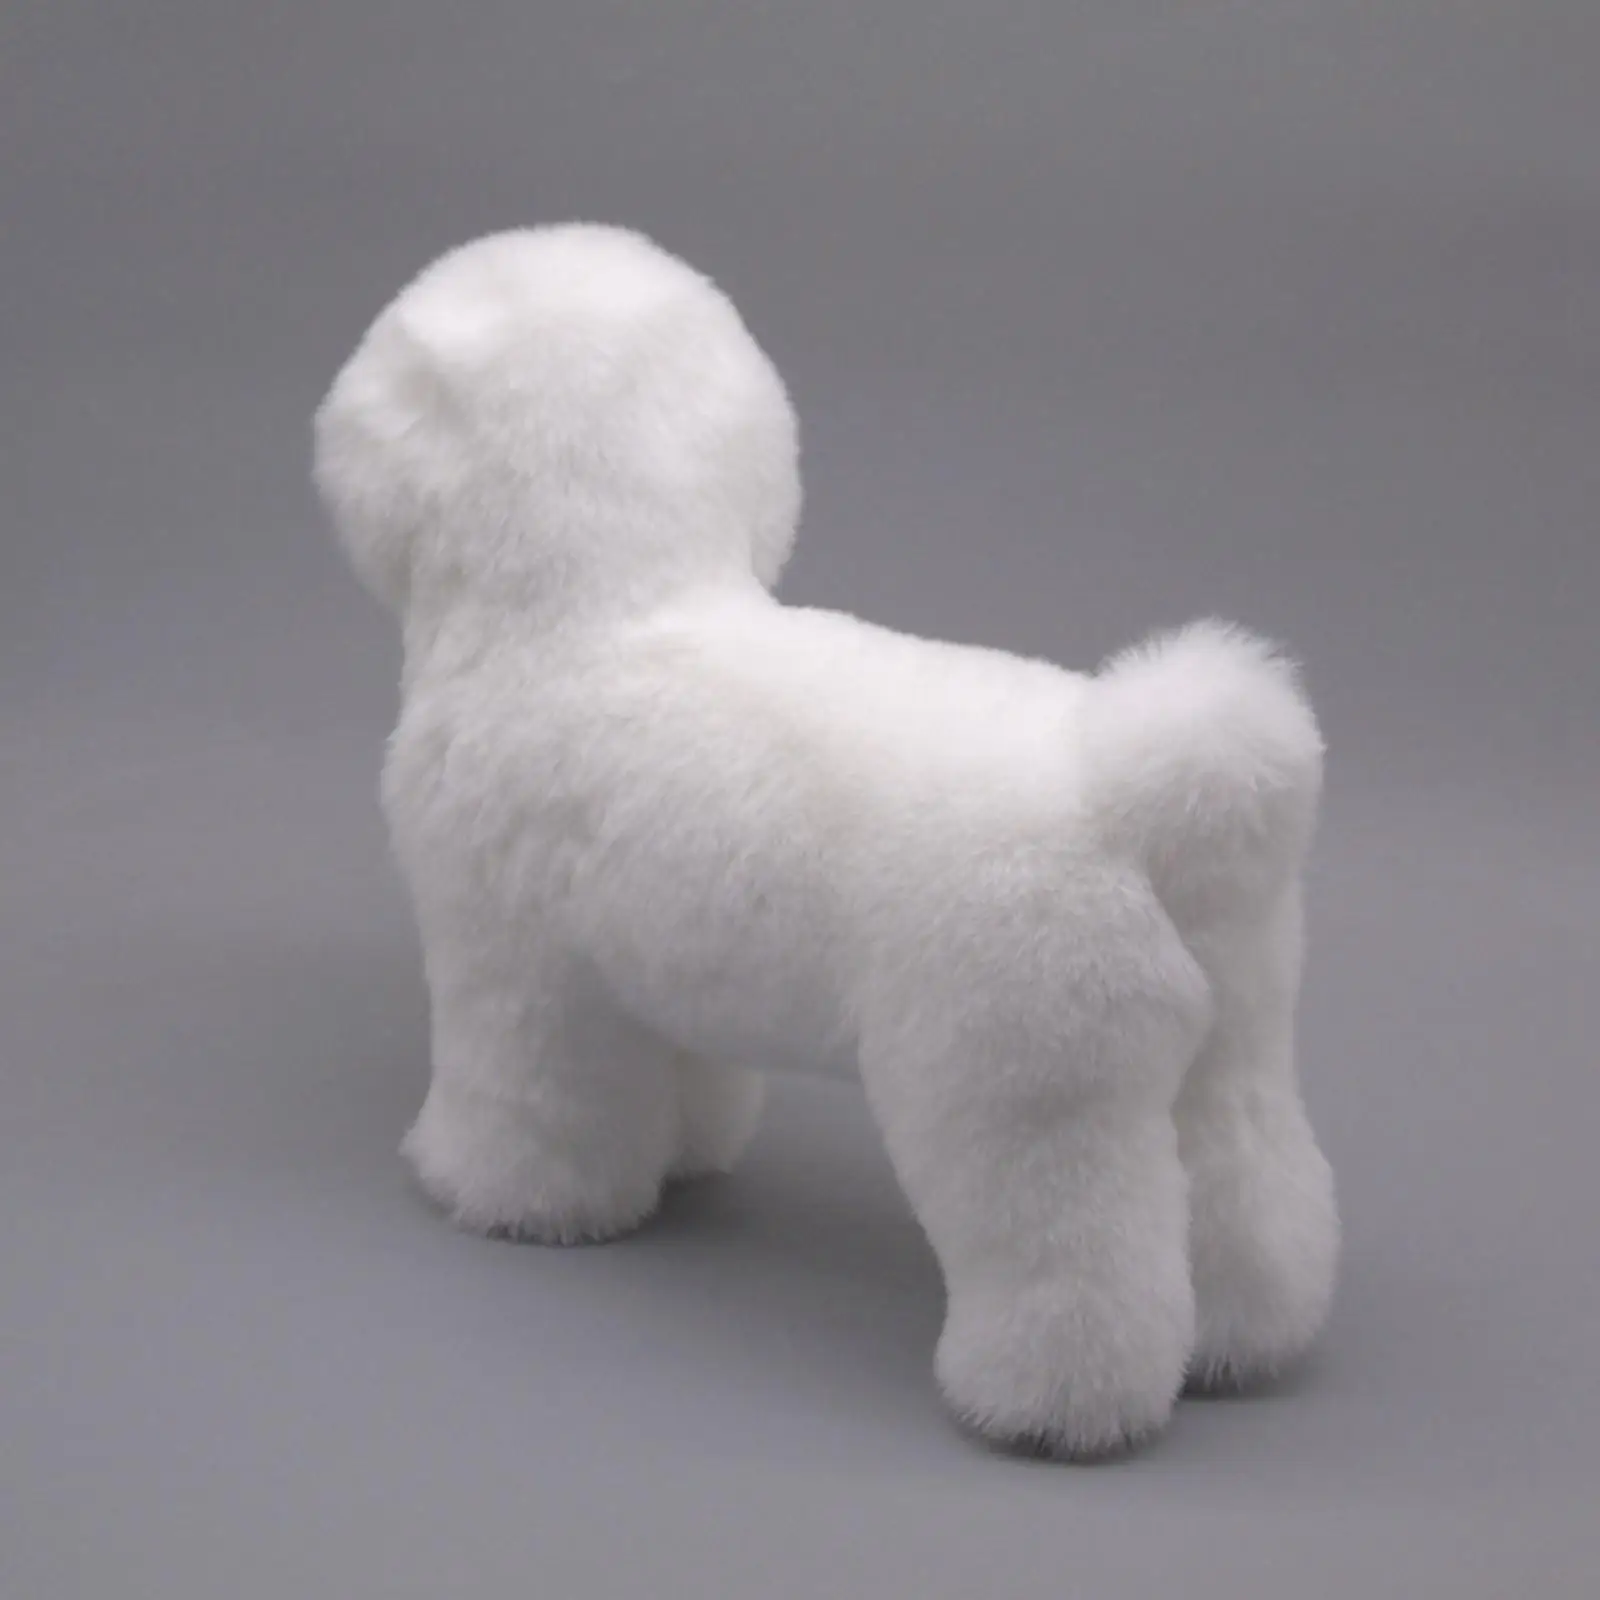 Realistic Dog Plush Toy Interactive for Children Kids Birthday Gifts